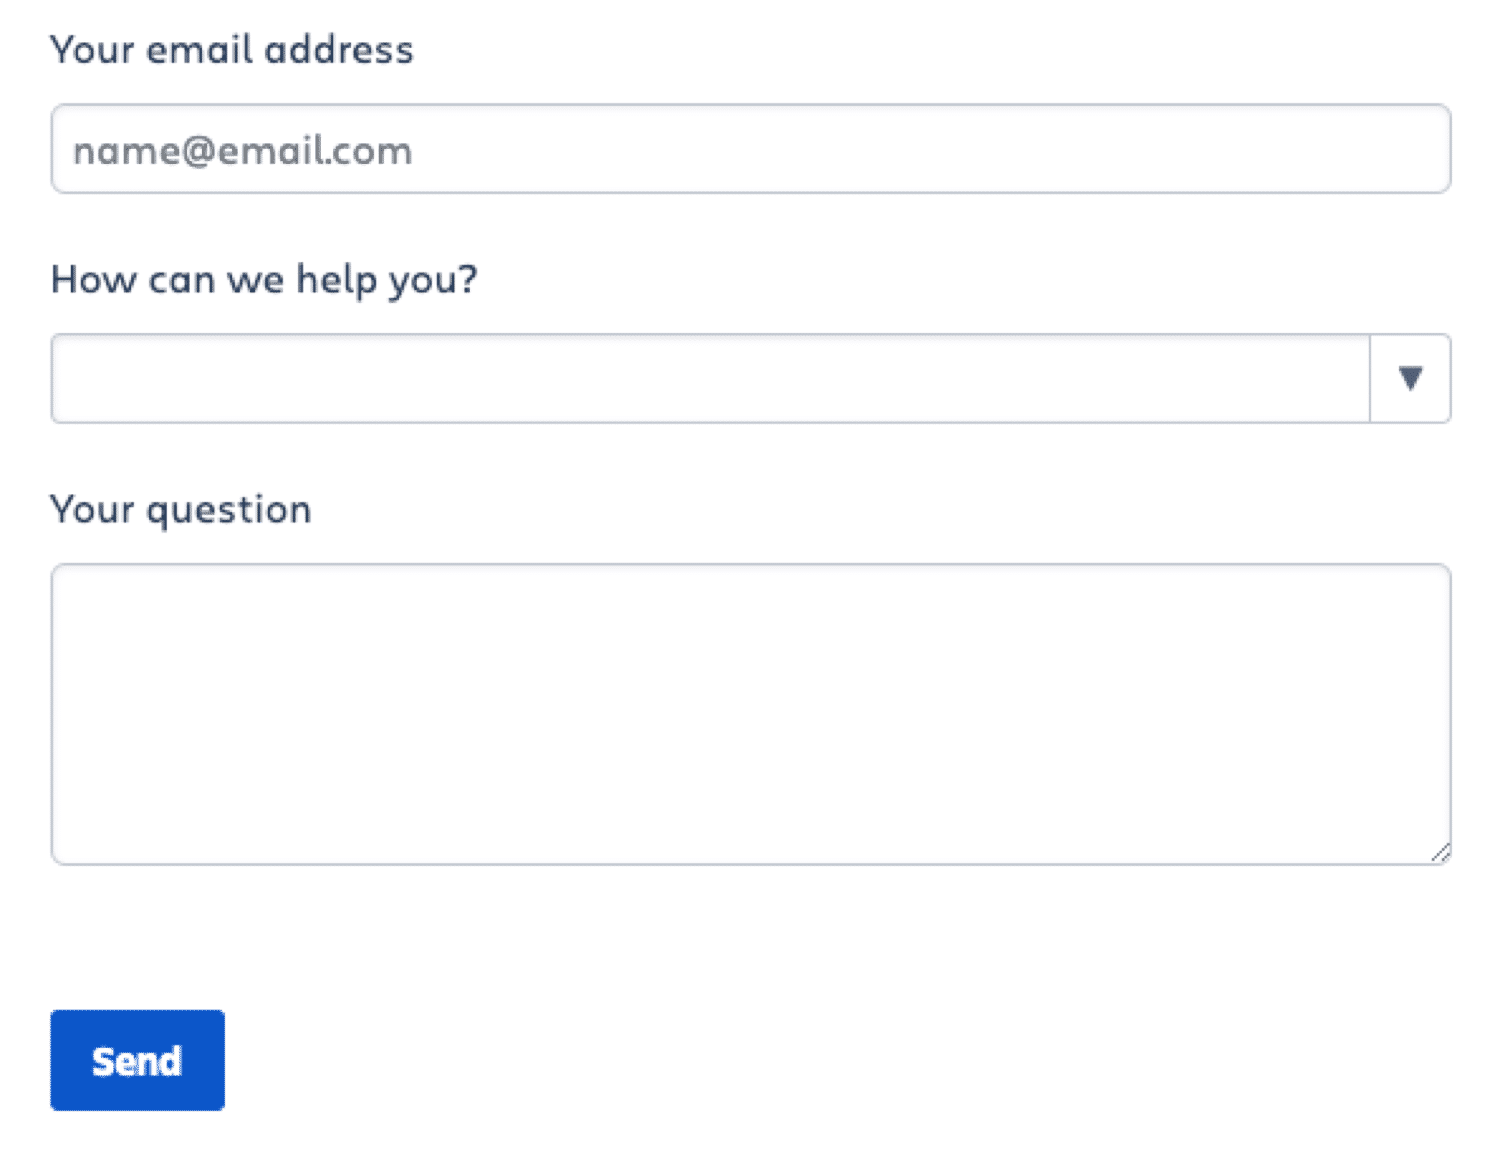 Reach out through website contact forms